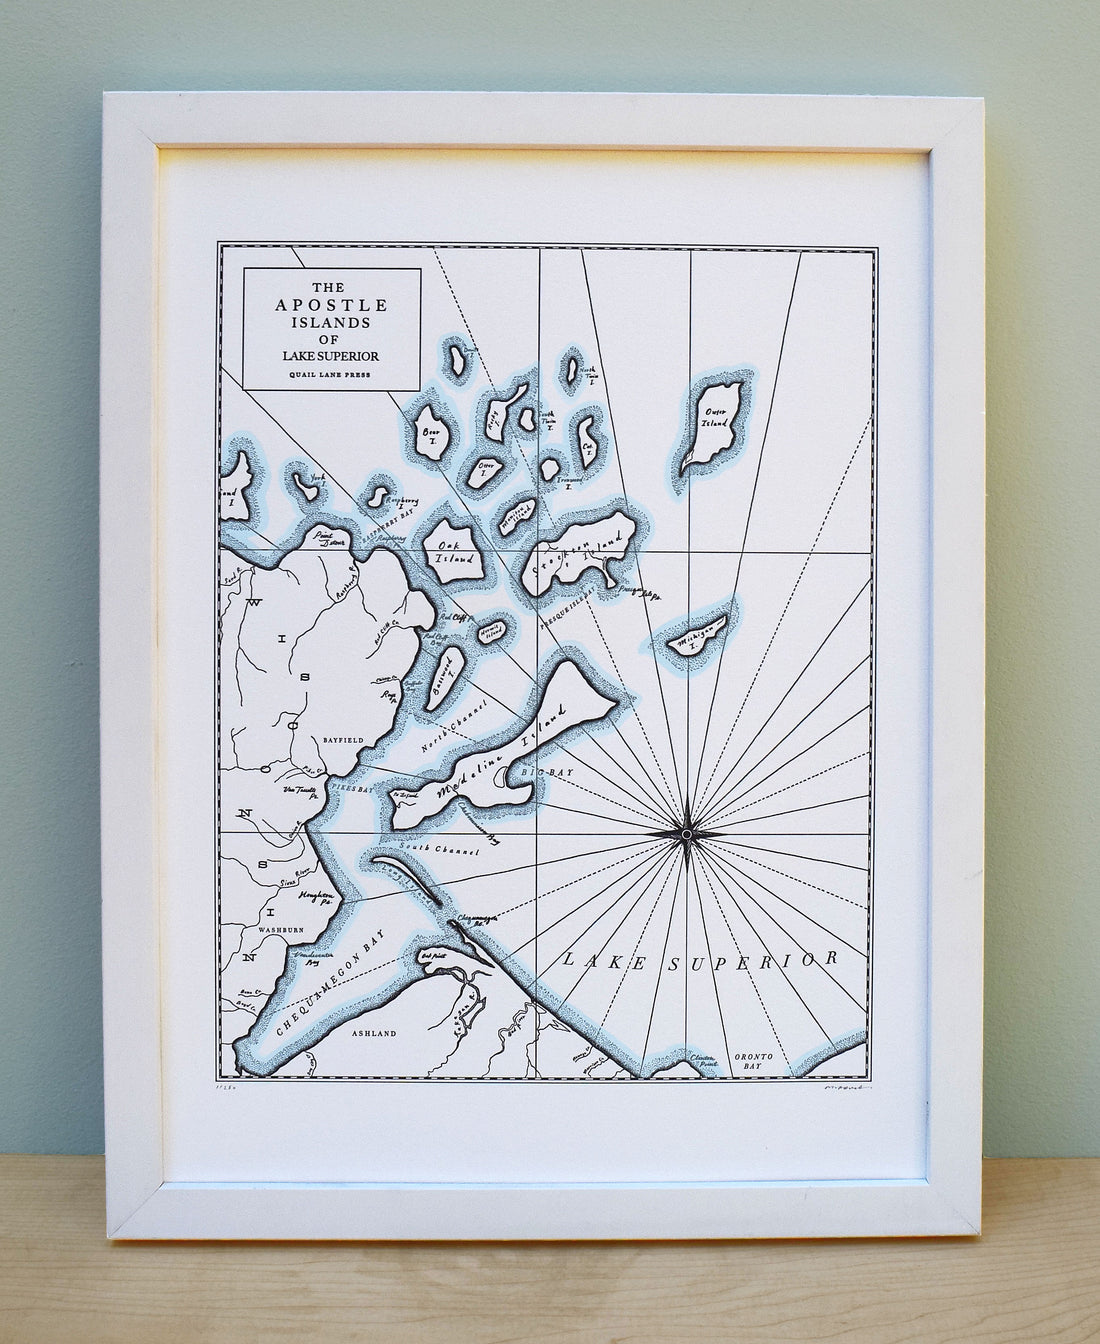 Hand-drawn letterpress printed map of the Apostle Islands, Lakes Superior